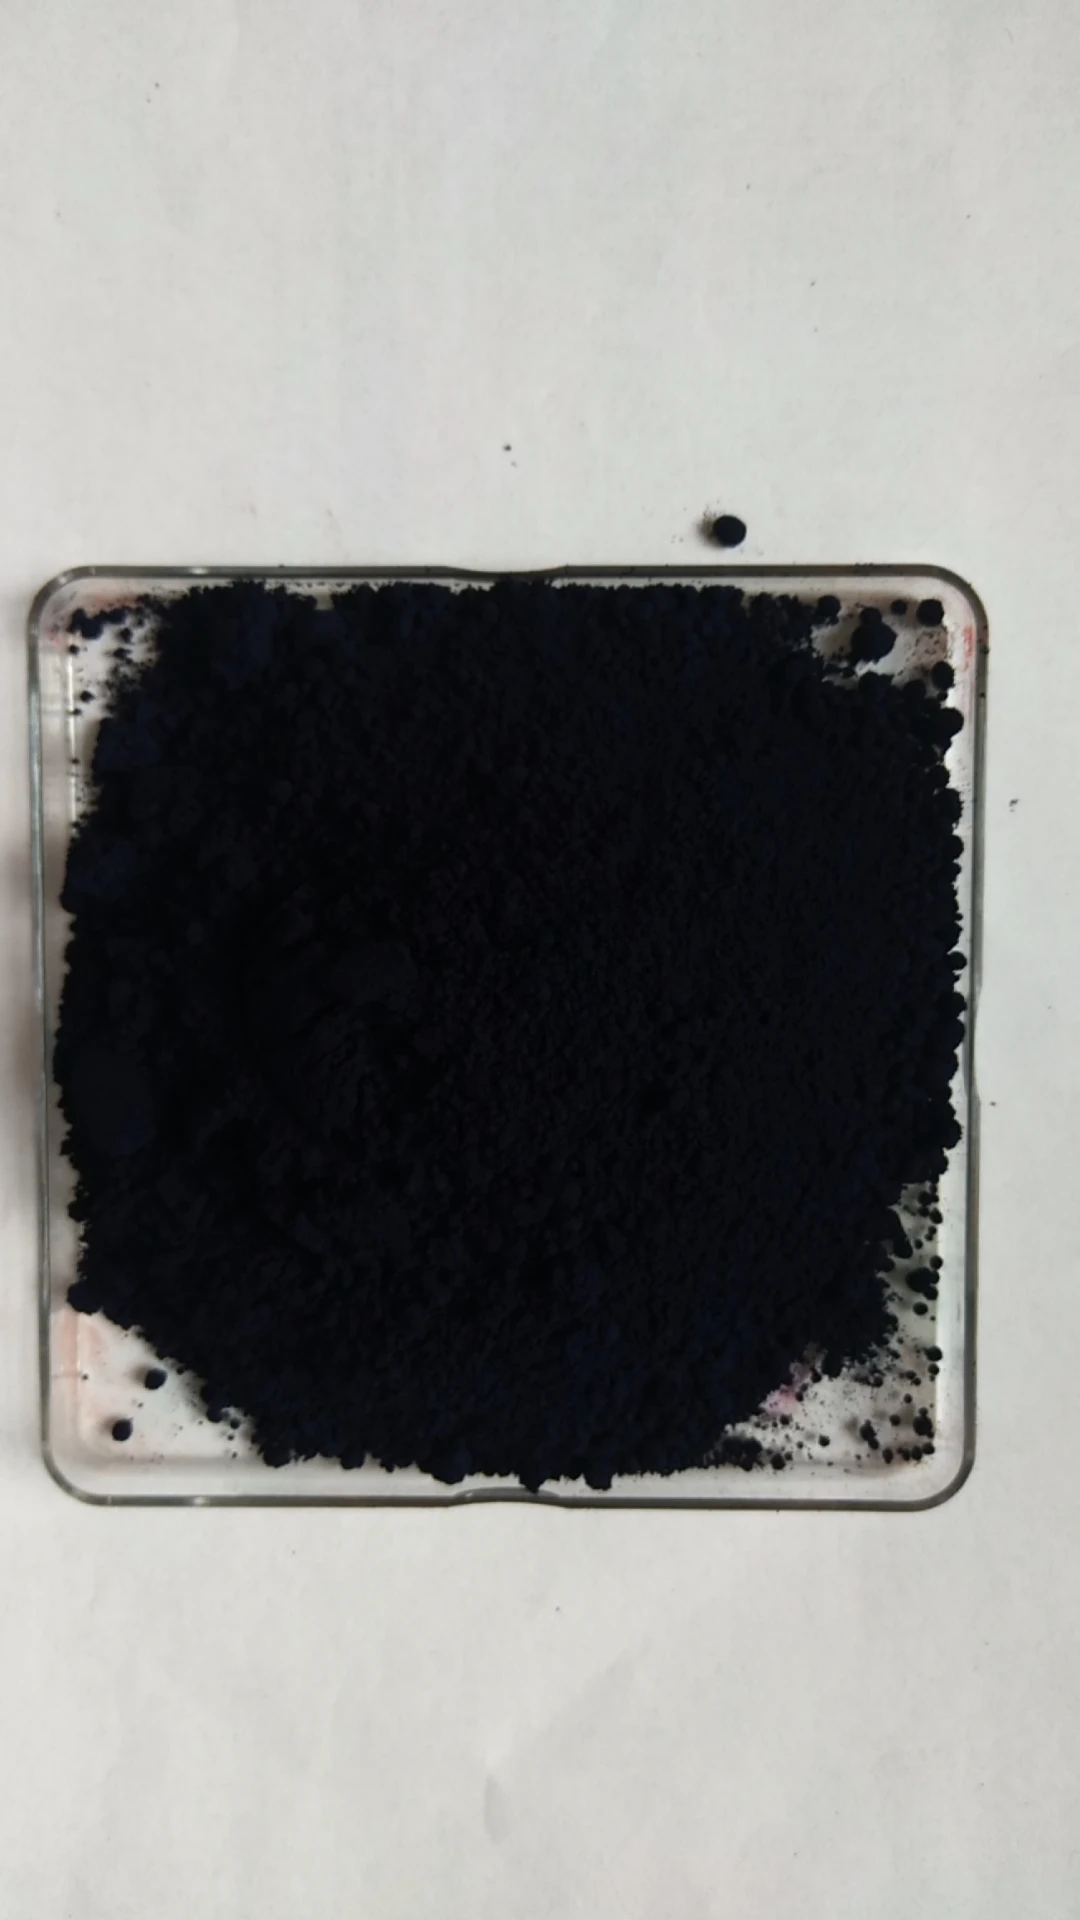 oil-soluble dye solvent blue furniture coloring dye cas: 2475-44-7